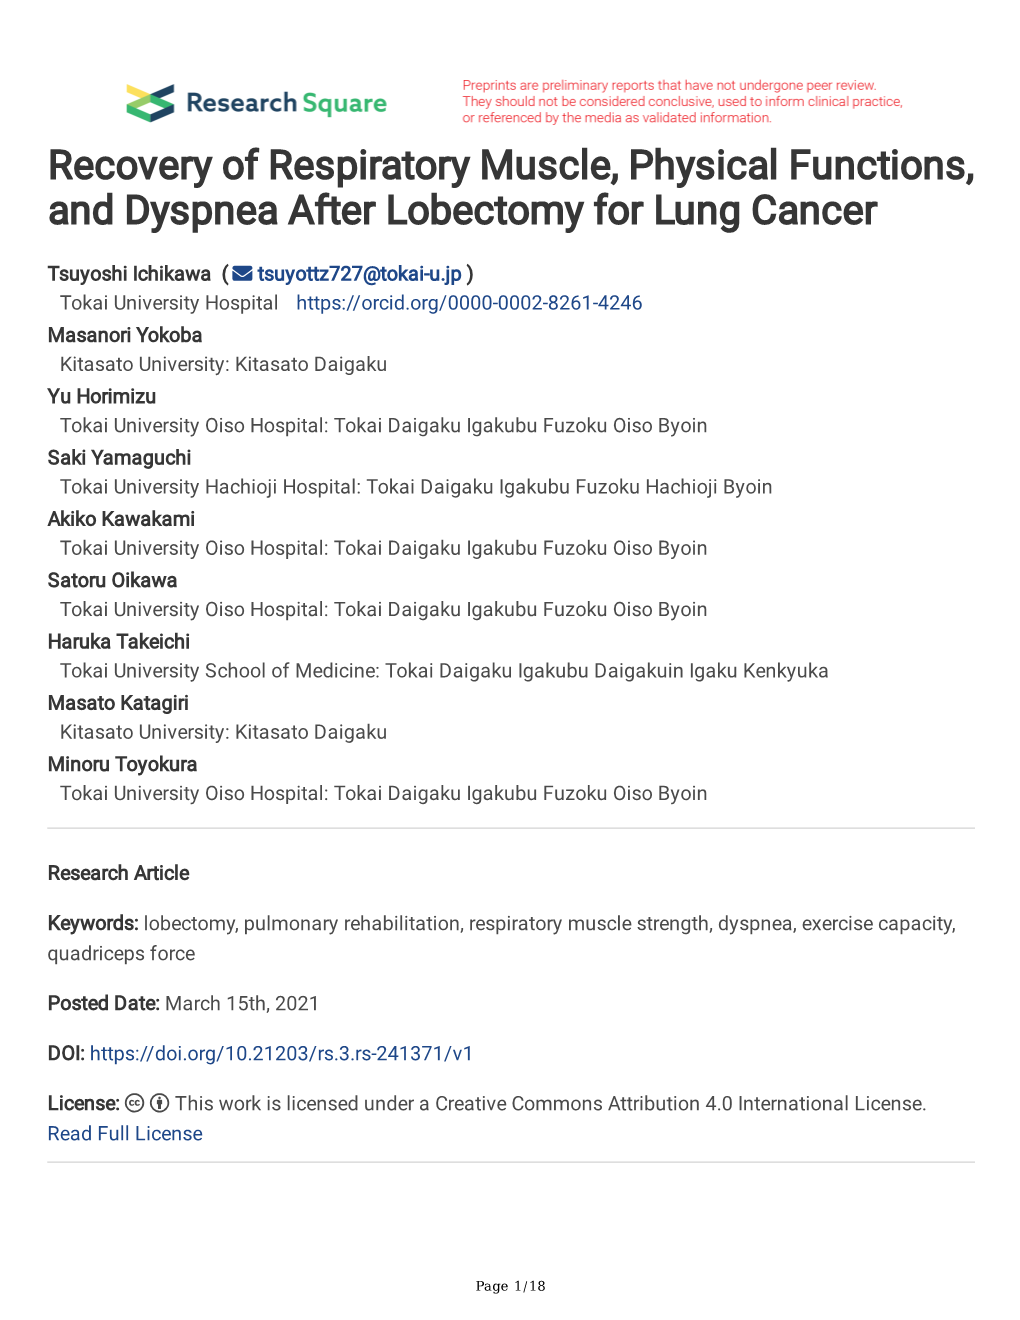 Recovery of Respiratory Muscle, Physical Functions, and Dyspnea After Lobectomy for Lung Cancer